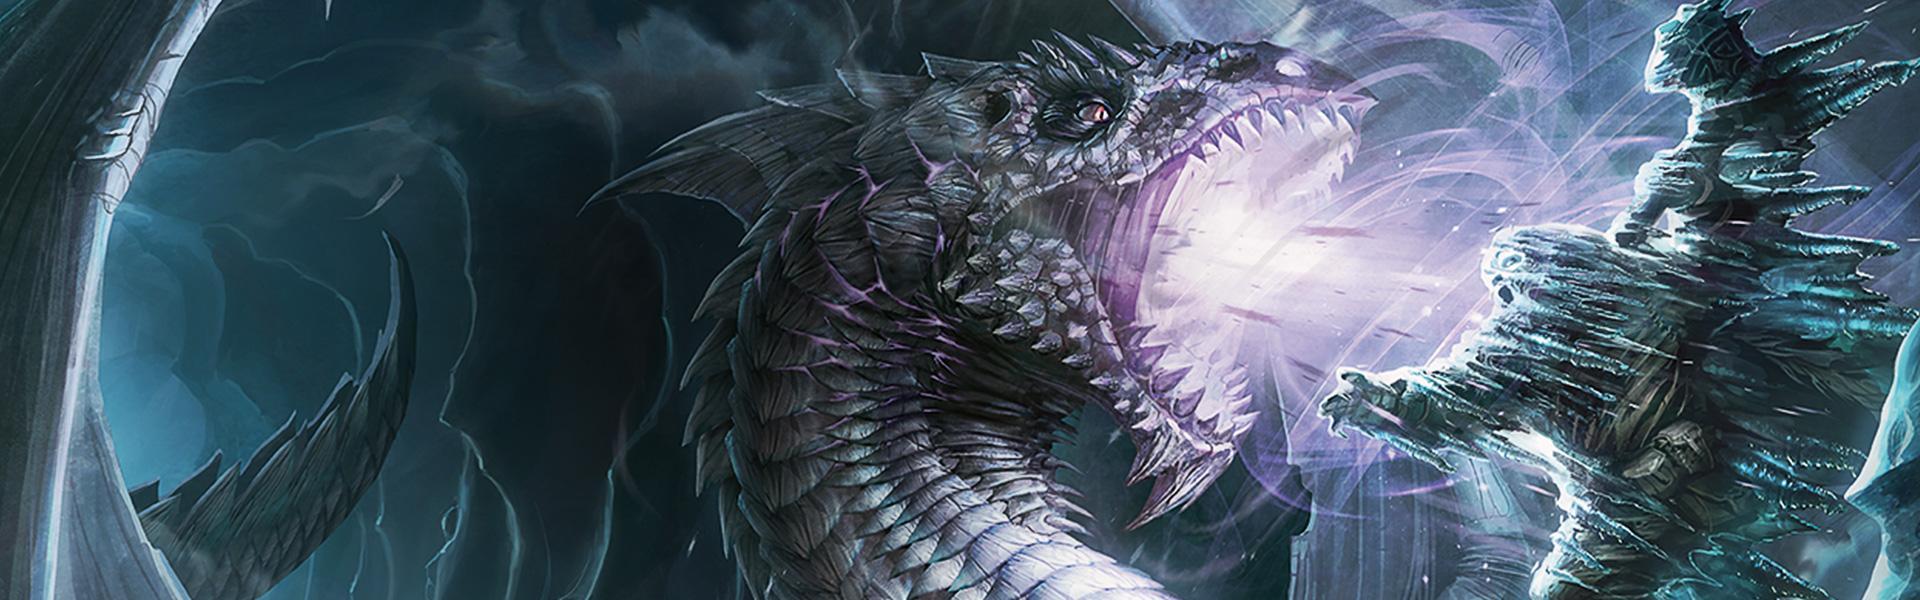 Hoard of the Dragon Queen. Dungeons & Dragons